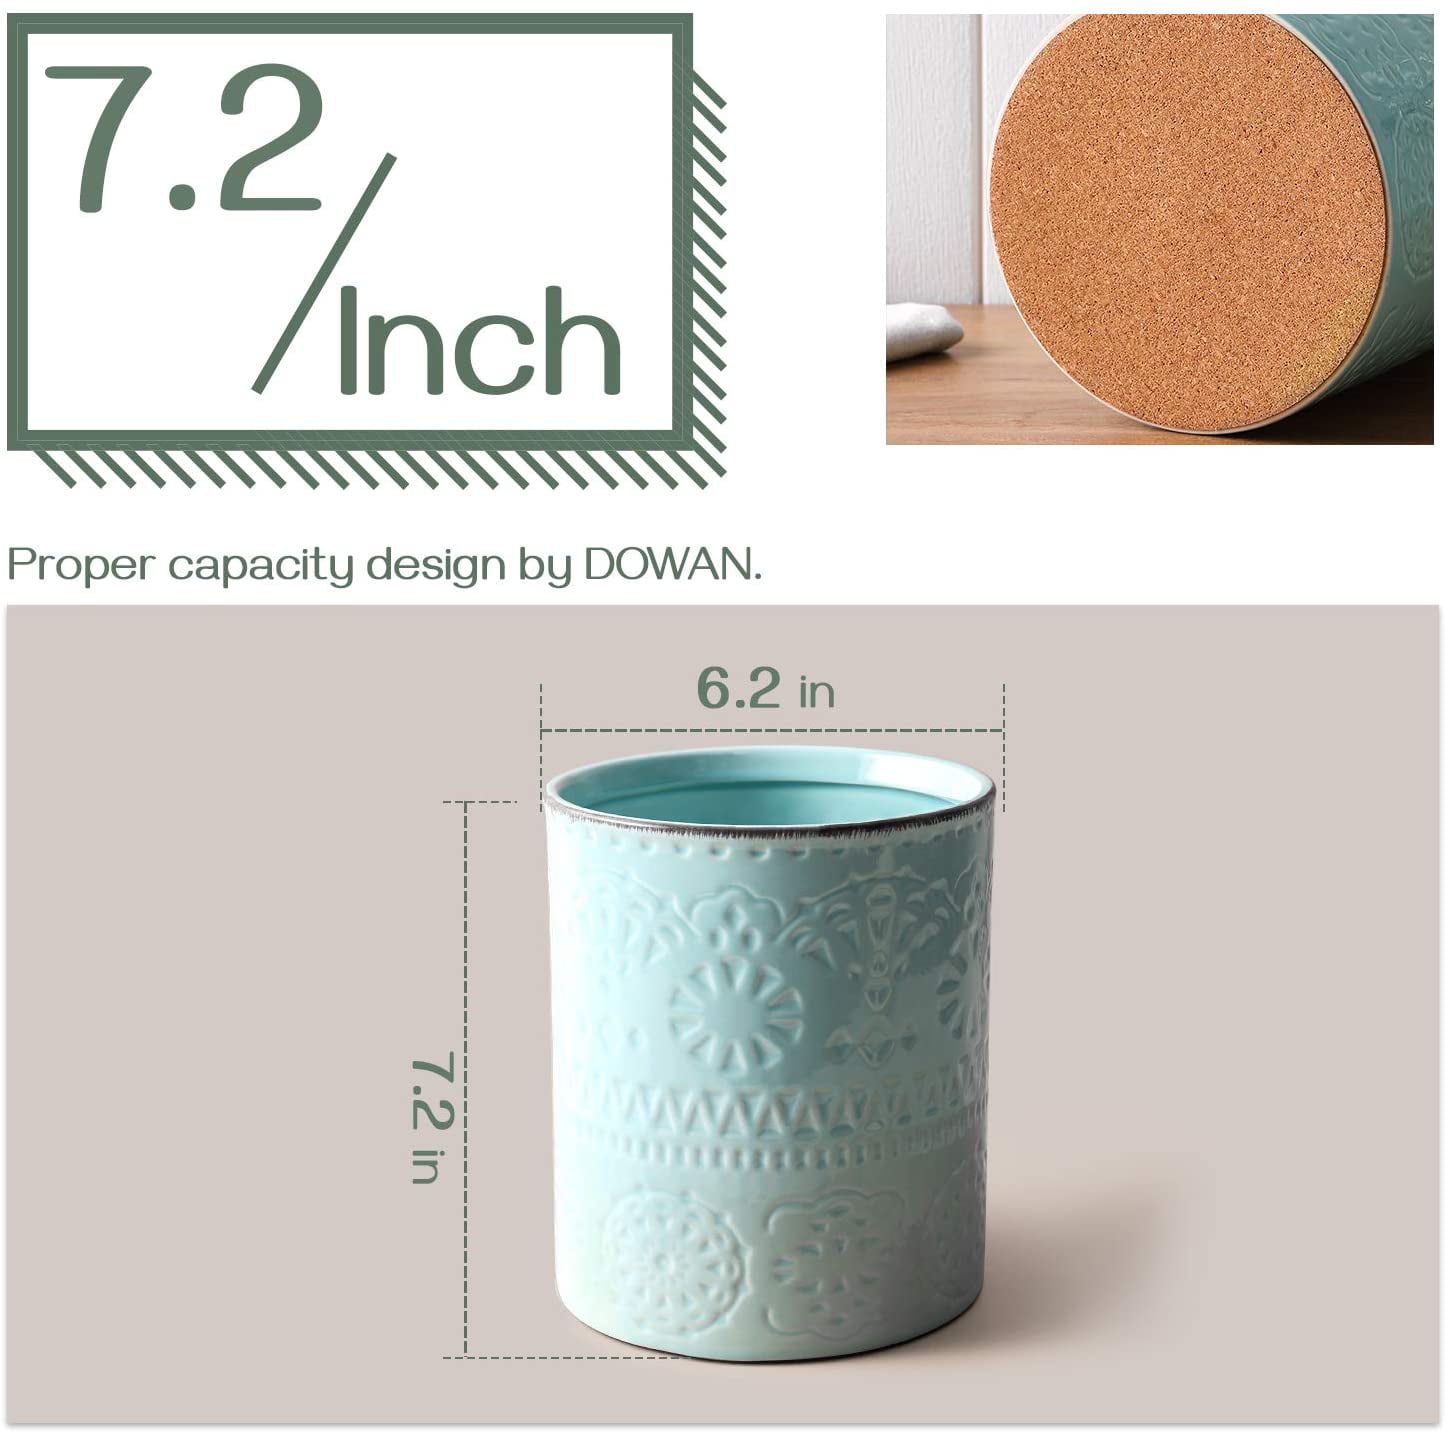 MyGift 6.7 inch Modern Round Concrete Utensil Holder for Kitchen Counter, Cooking Tool Storage Crock with Copper Tone Accent